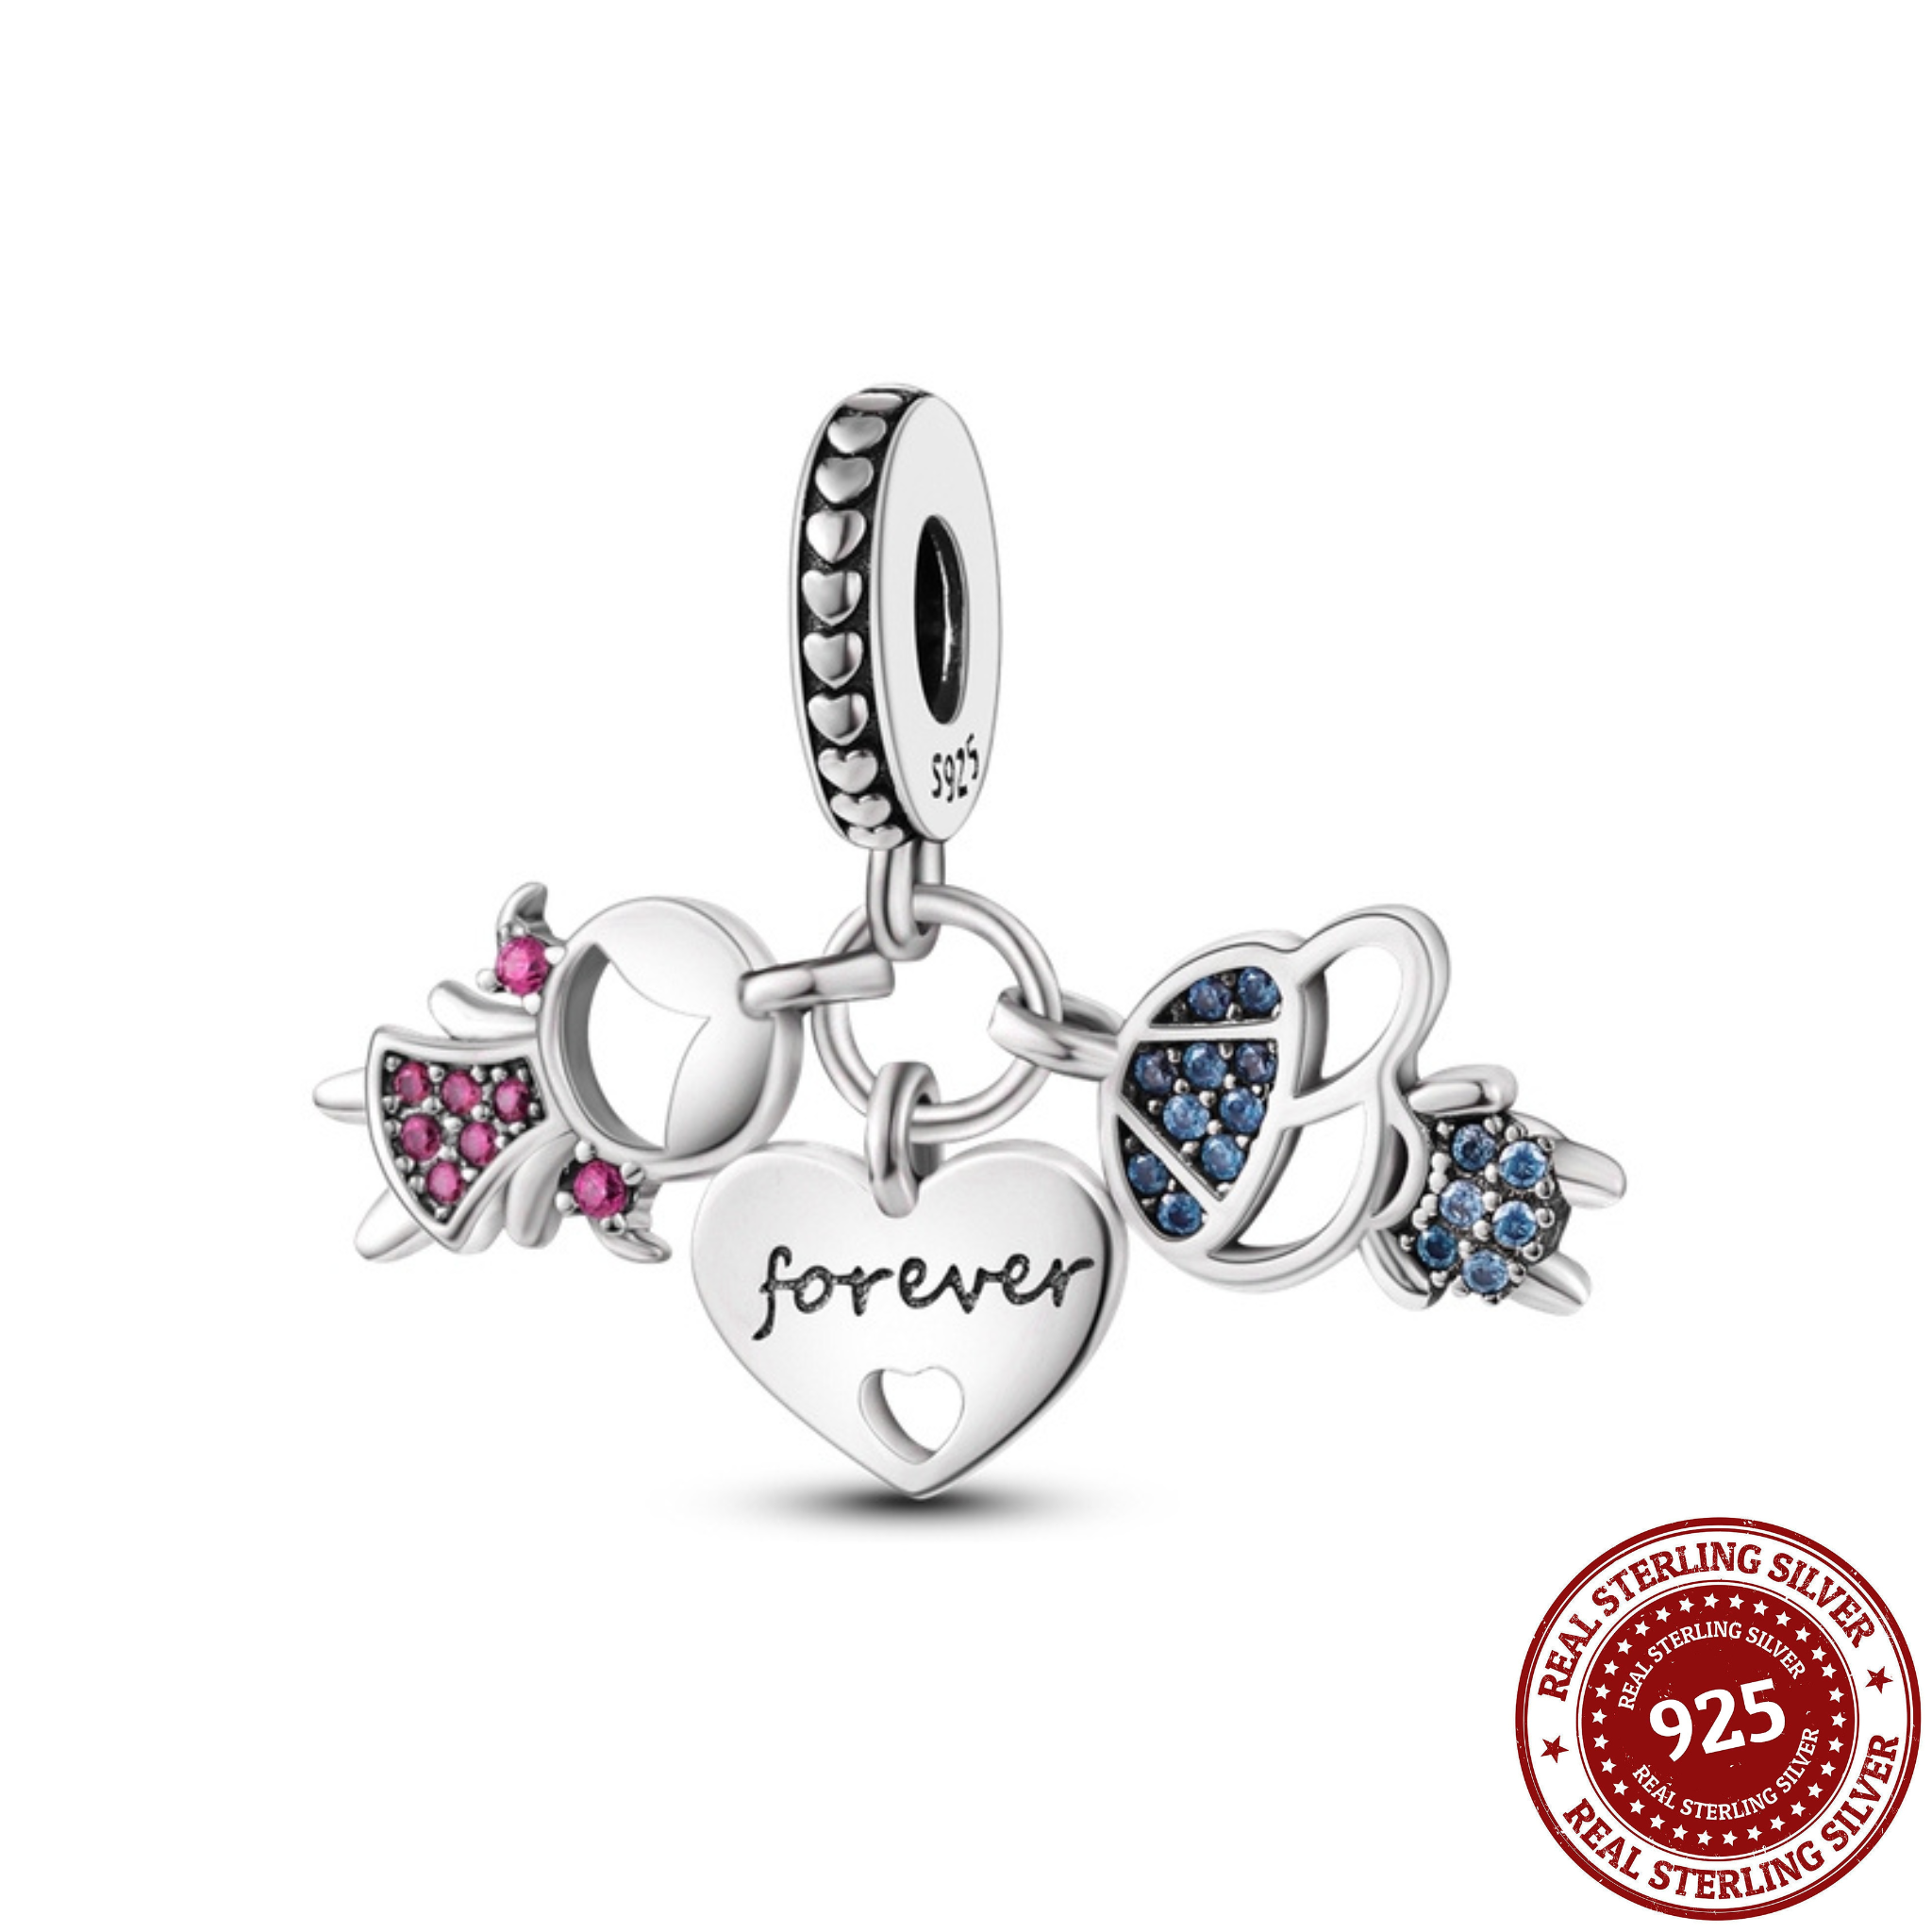 Boy and Girl Forever Charm